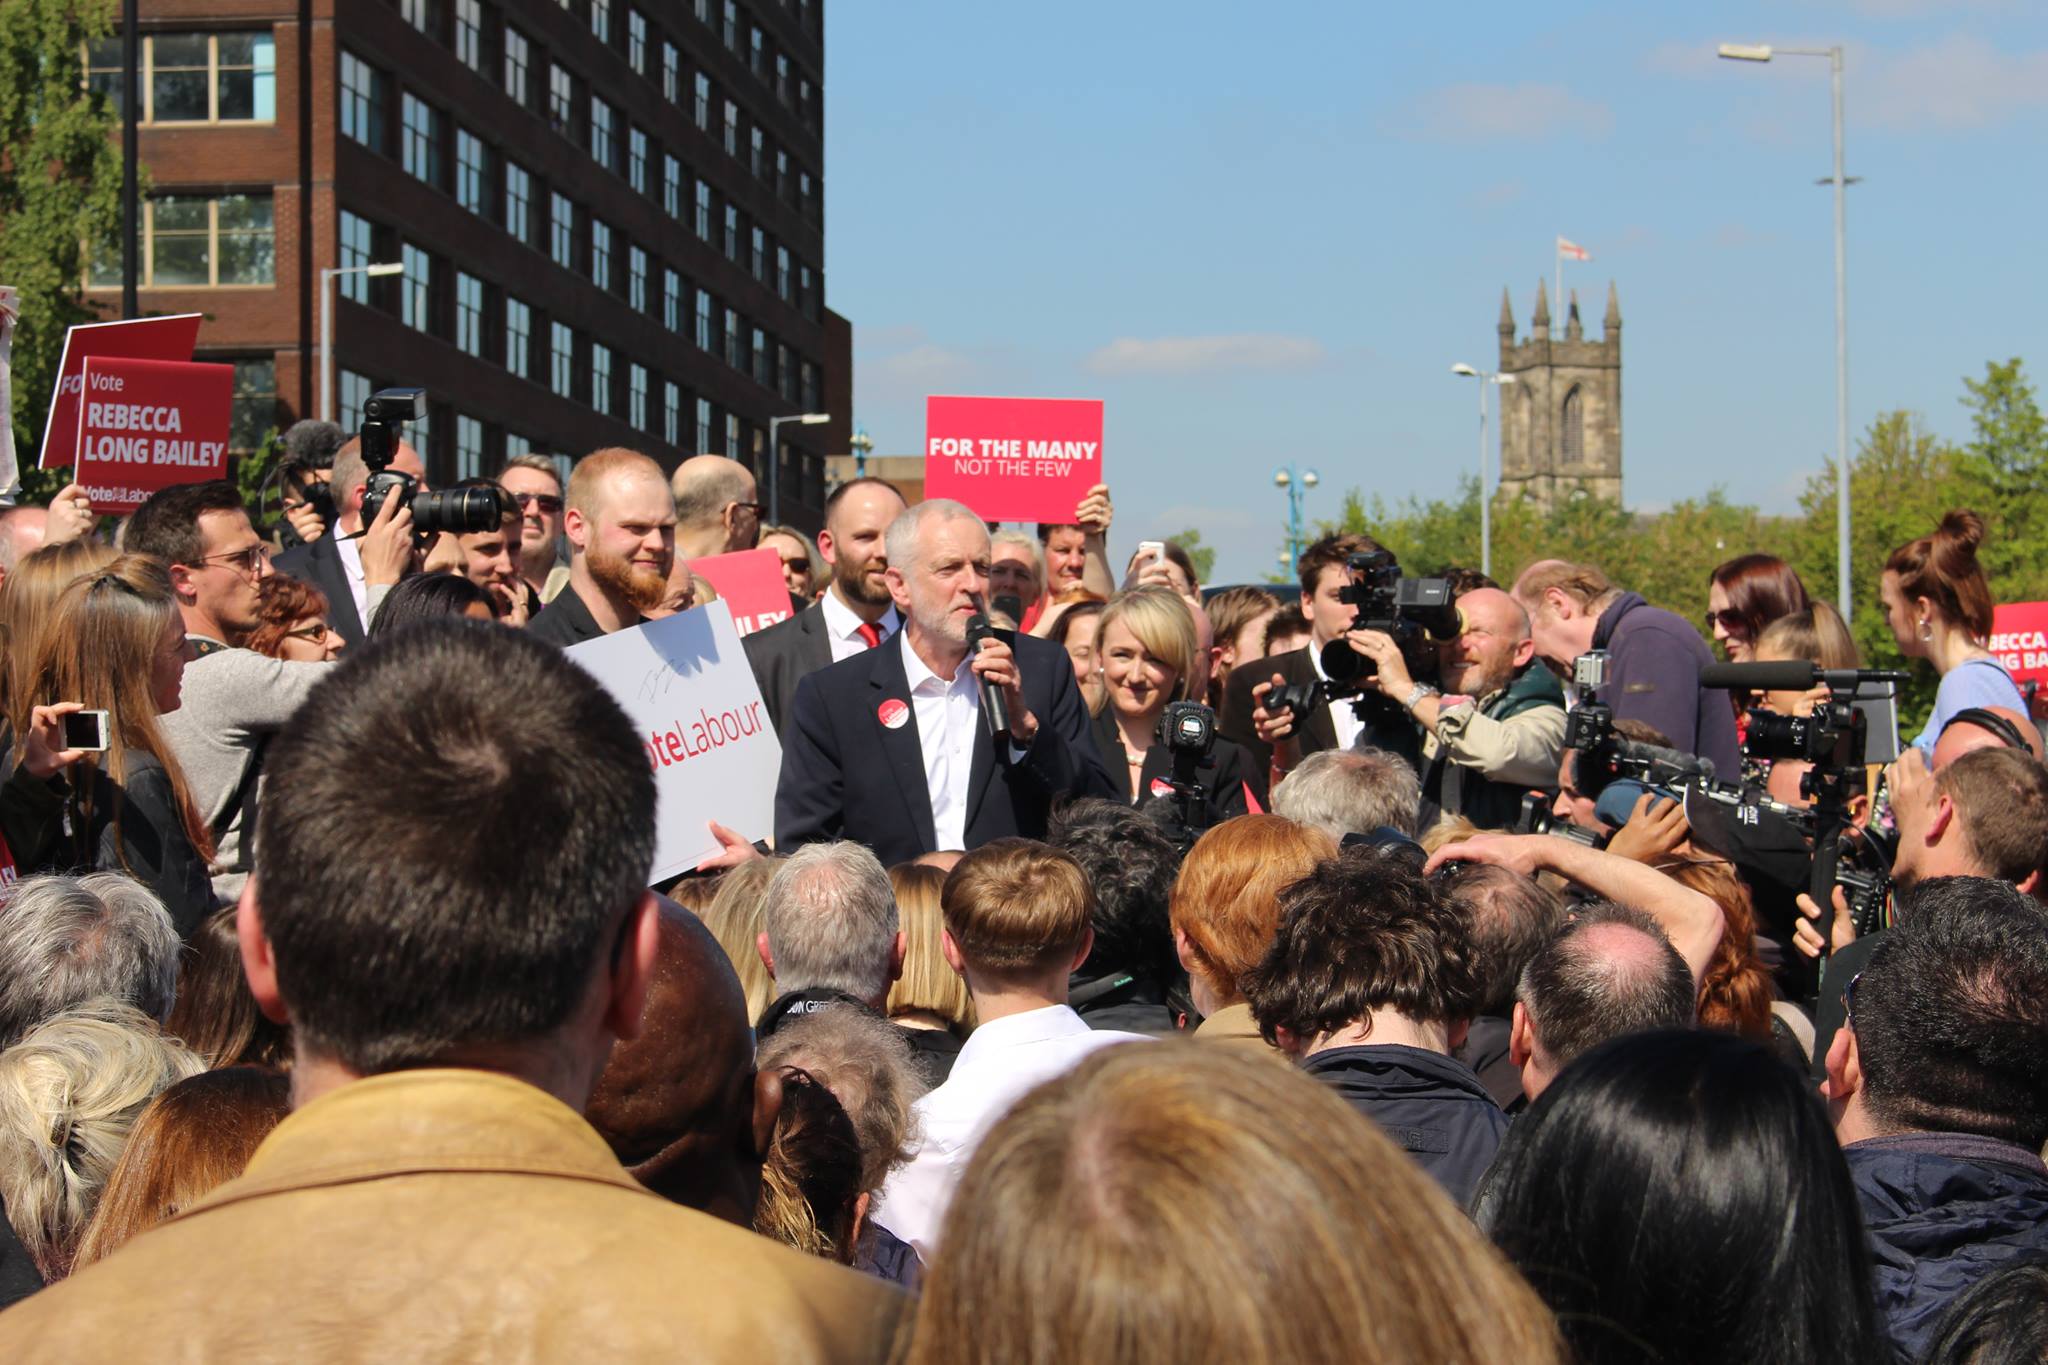 Jeremy Corbyn at a rally in Salford